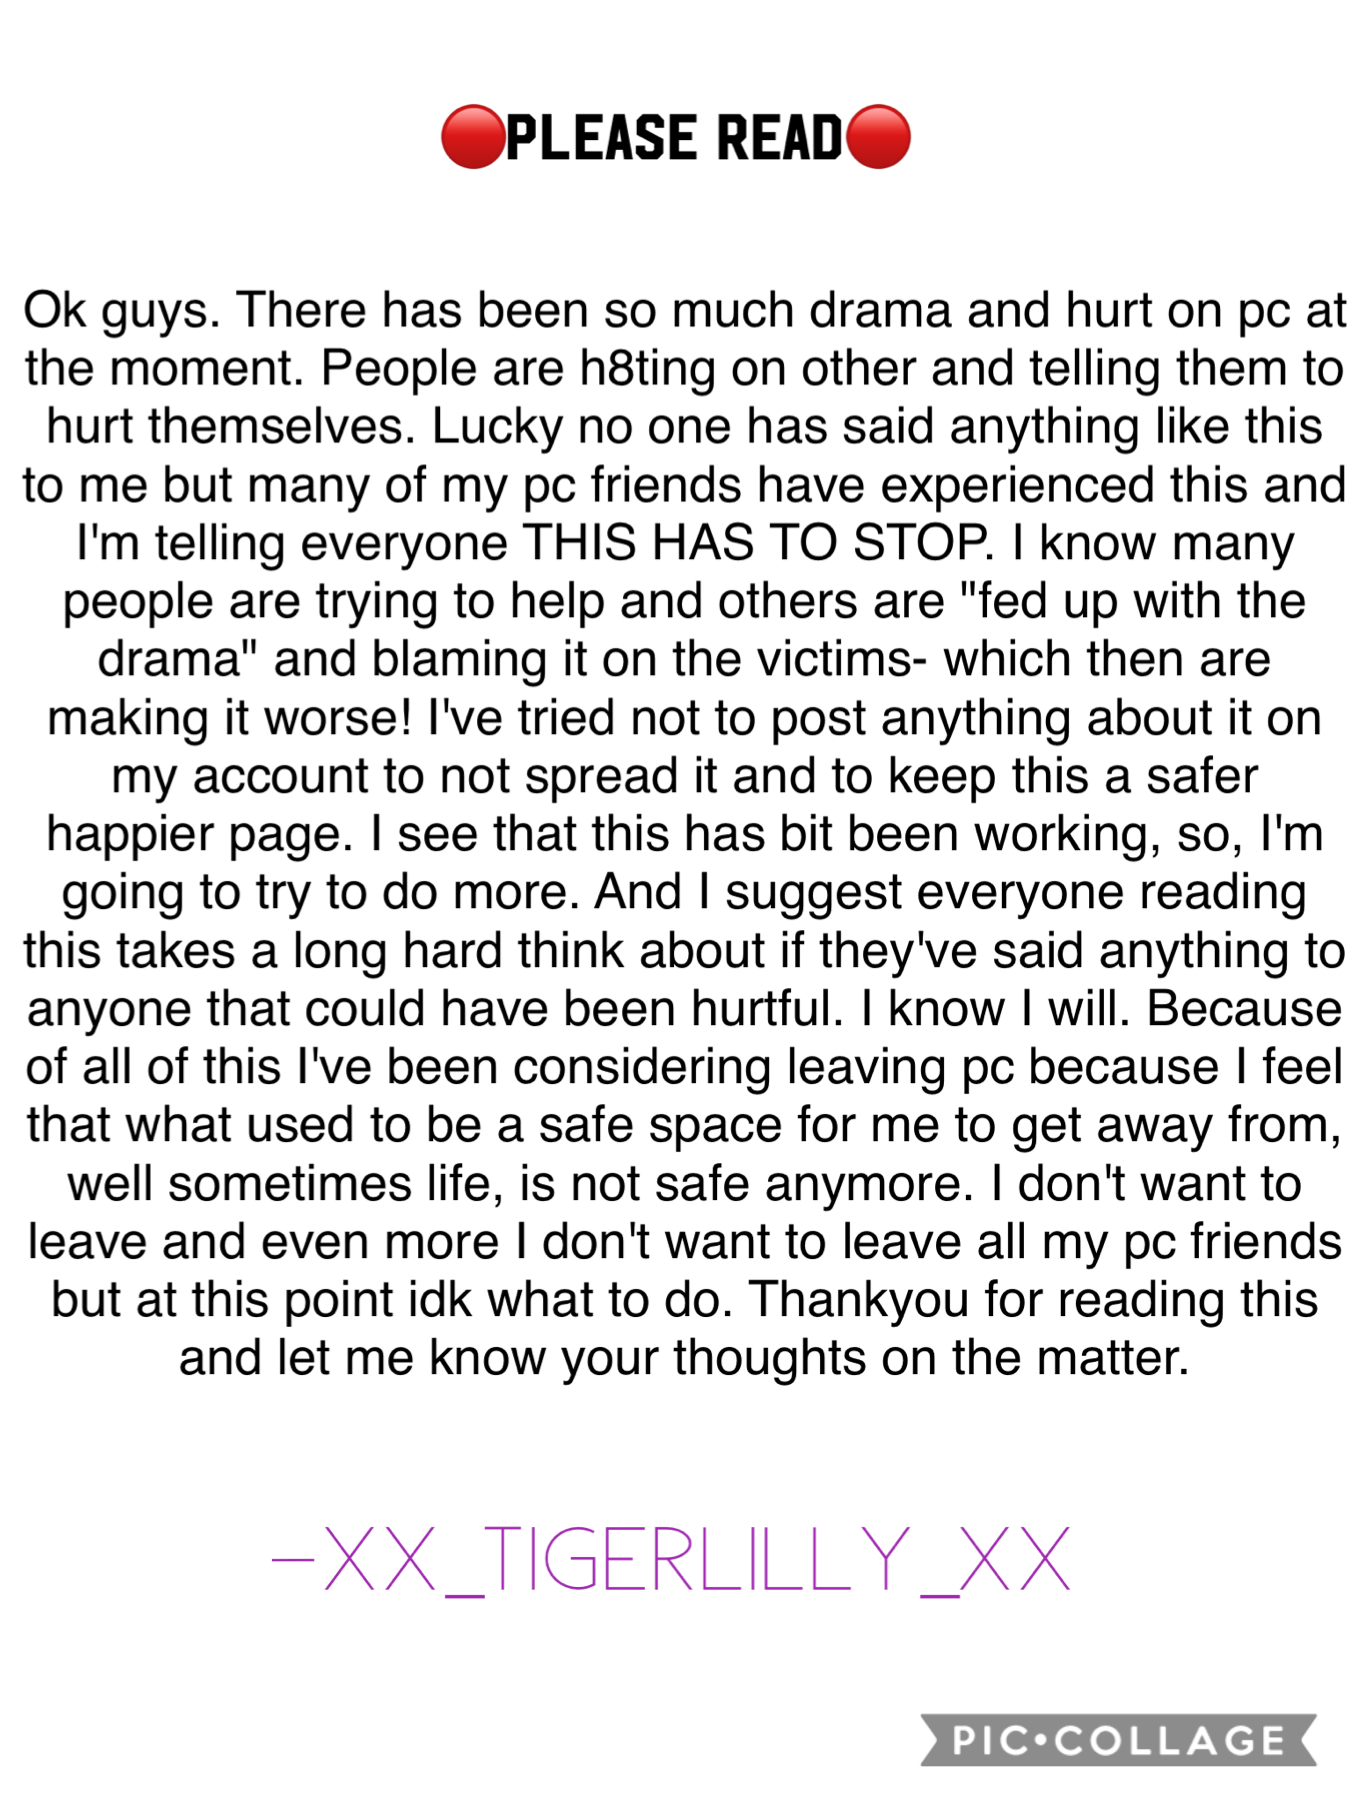 🔴TAP🔴
I've been on pc for a LONG time and have seen bits of h8 and drama but NEVER this much. Over the past few weeks there has been so much of everything and just from watching all if it happen and chatting to ppl it's taking a toll on me too. 